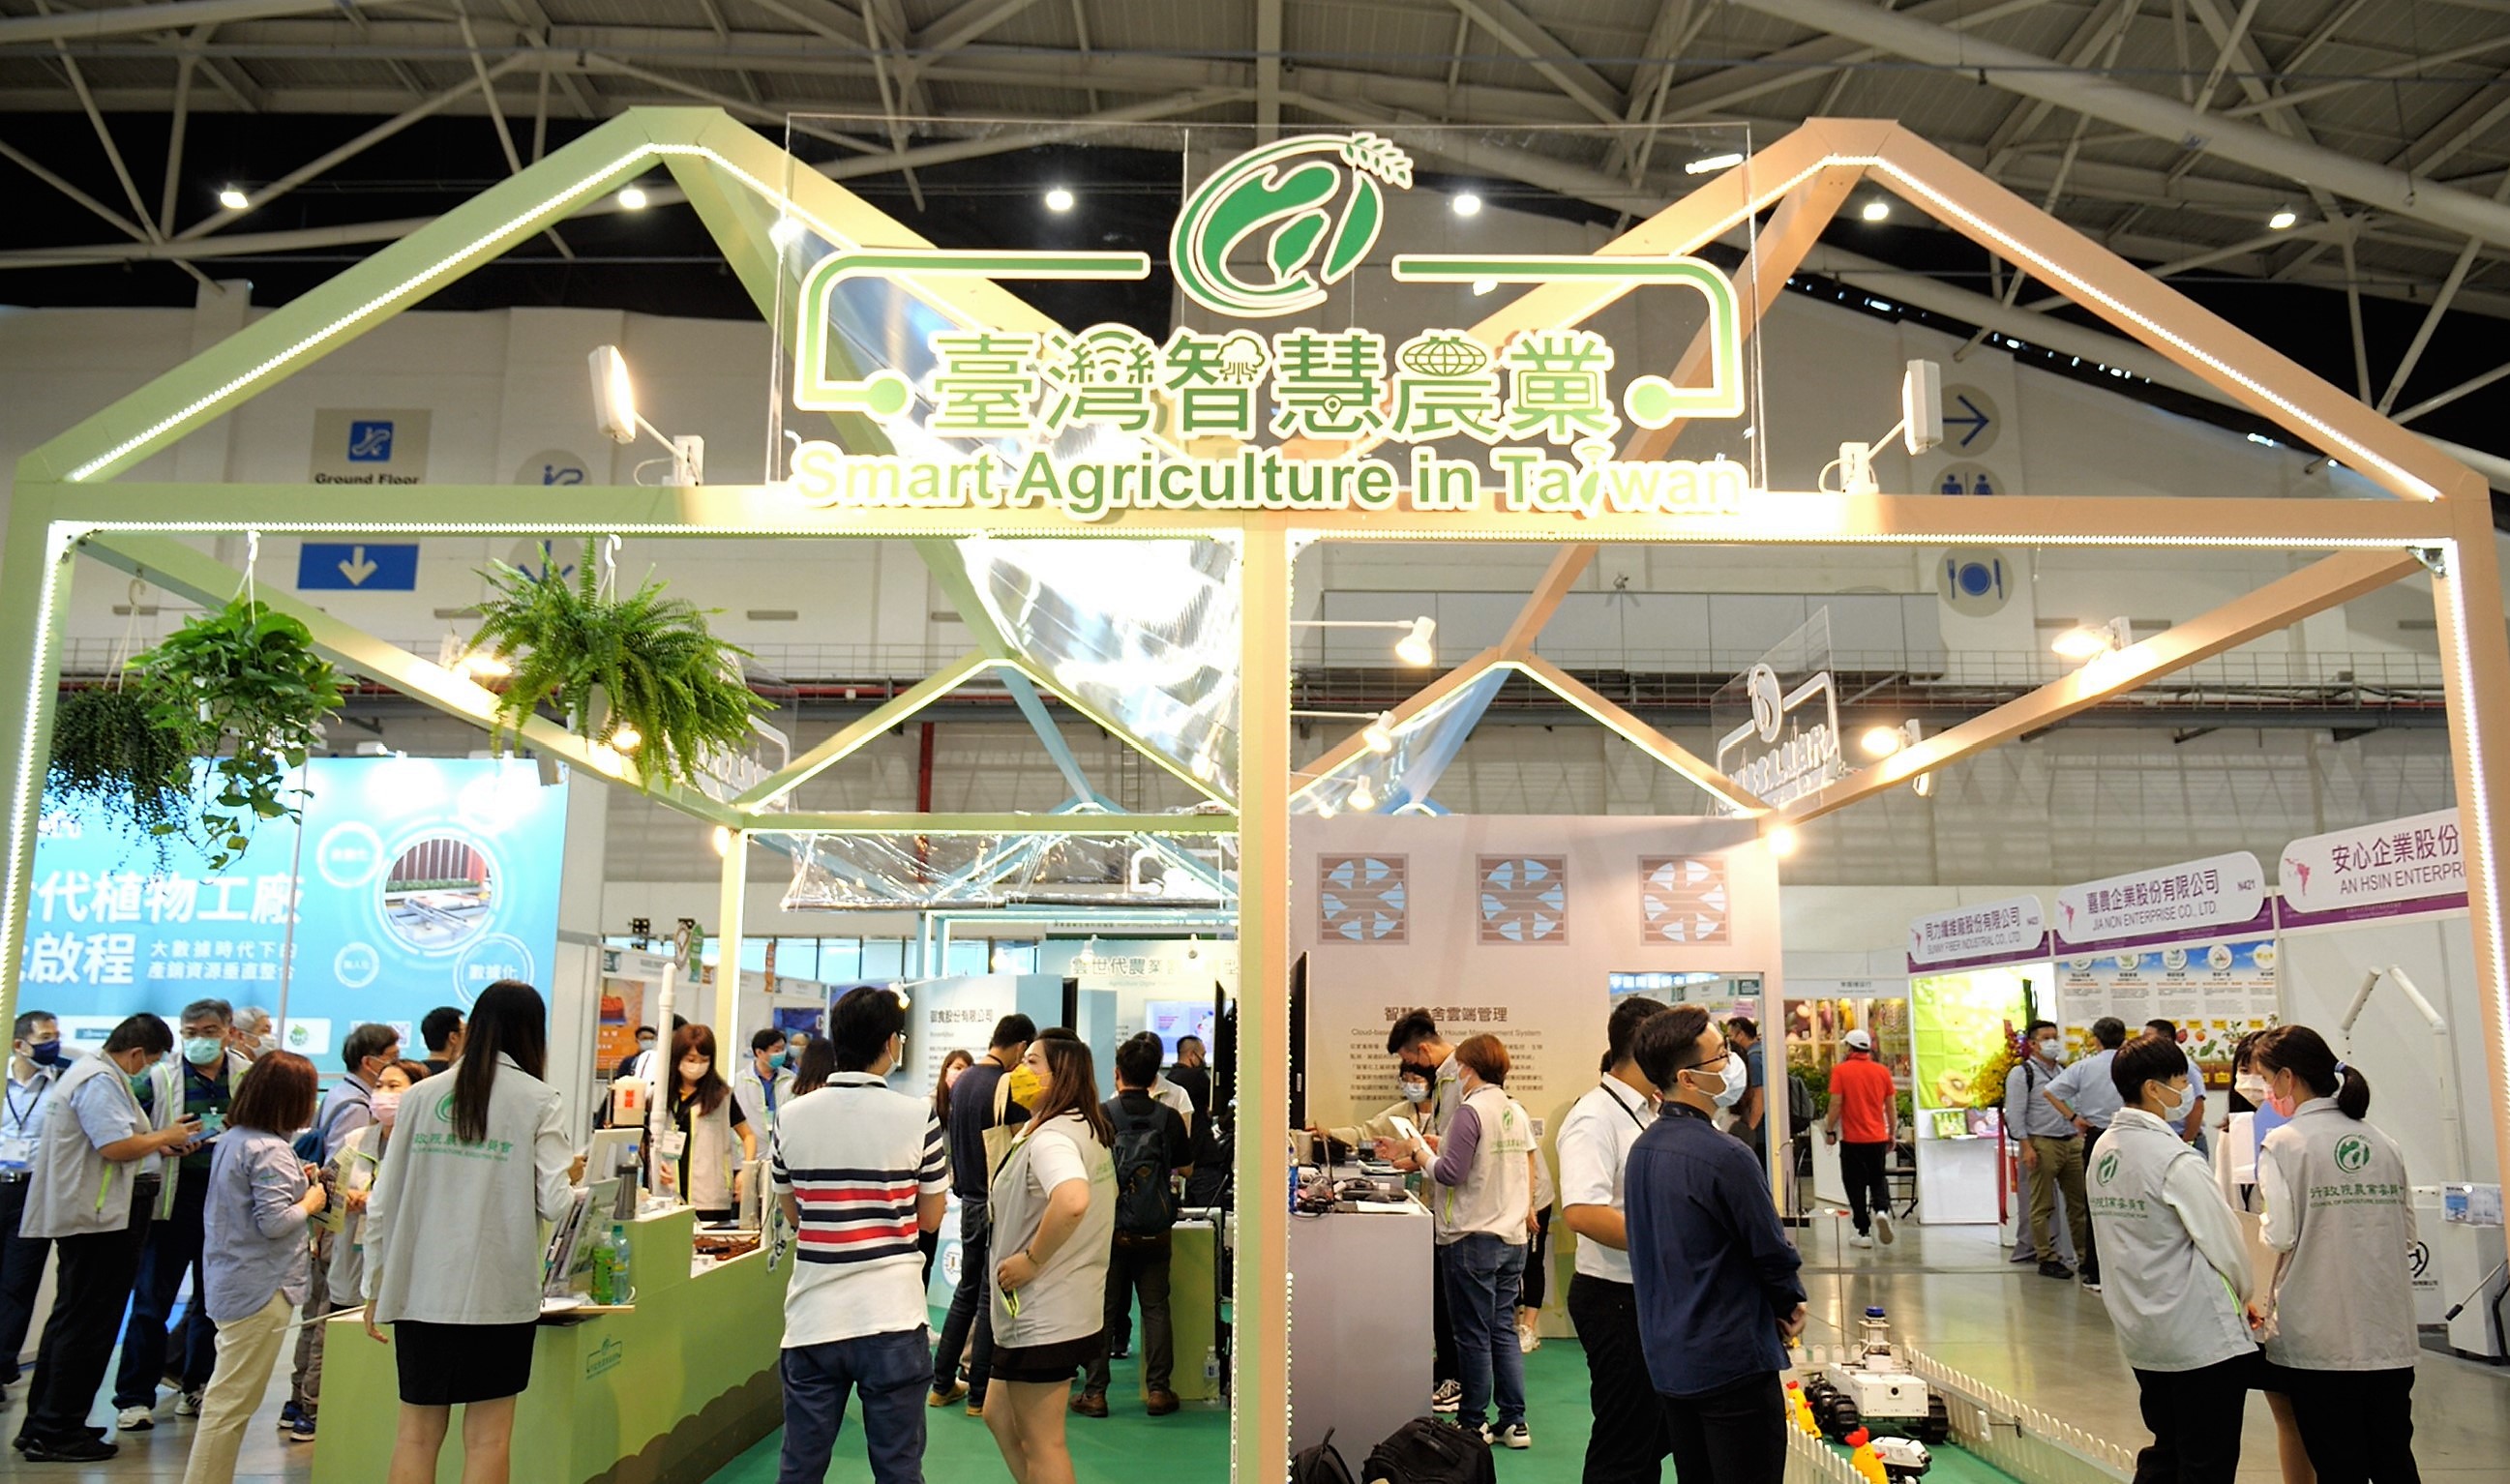 2023 Taiwan Smart Agriweek and Taiwan International Ocean and Fisheries Industry Show: The largest smart agriculture, aquaculture, and livestock solutions platform in Asia will be held in Taiwan